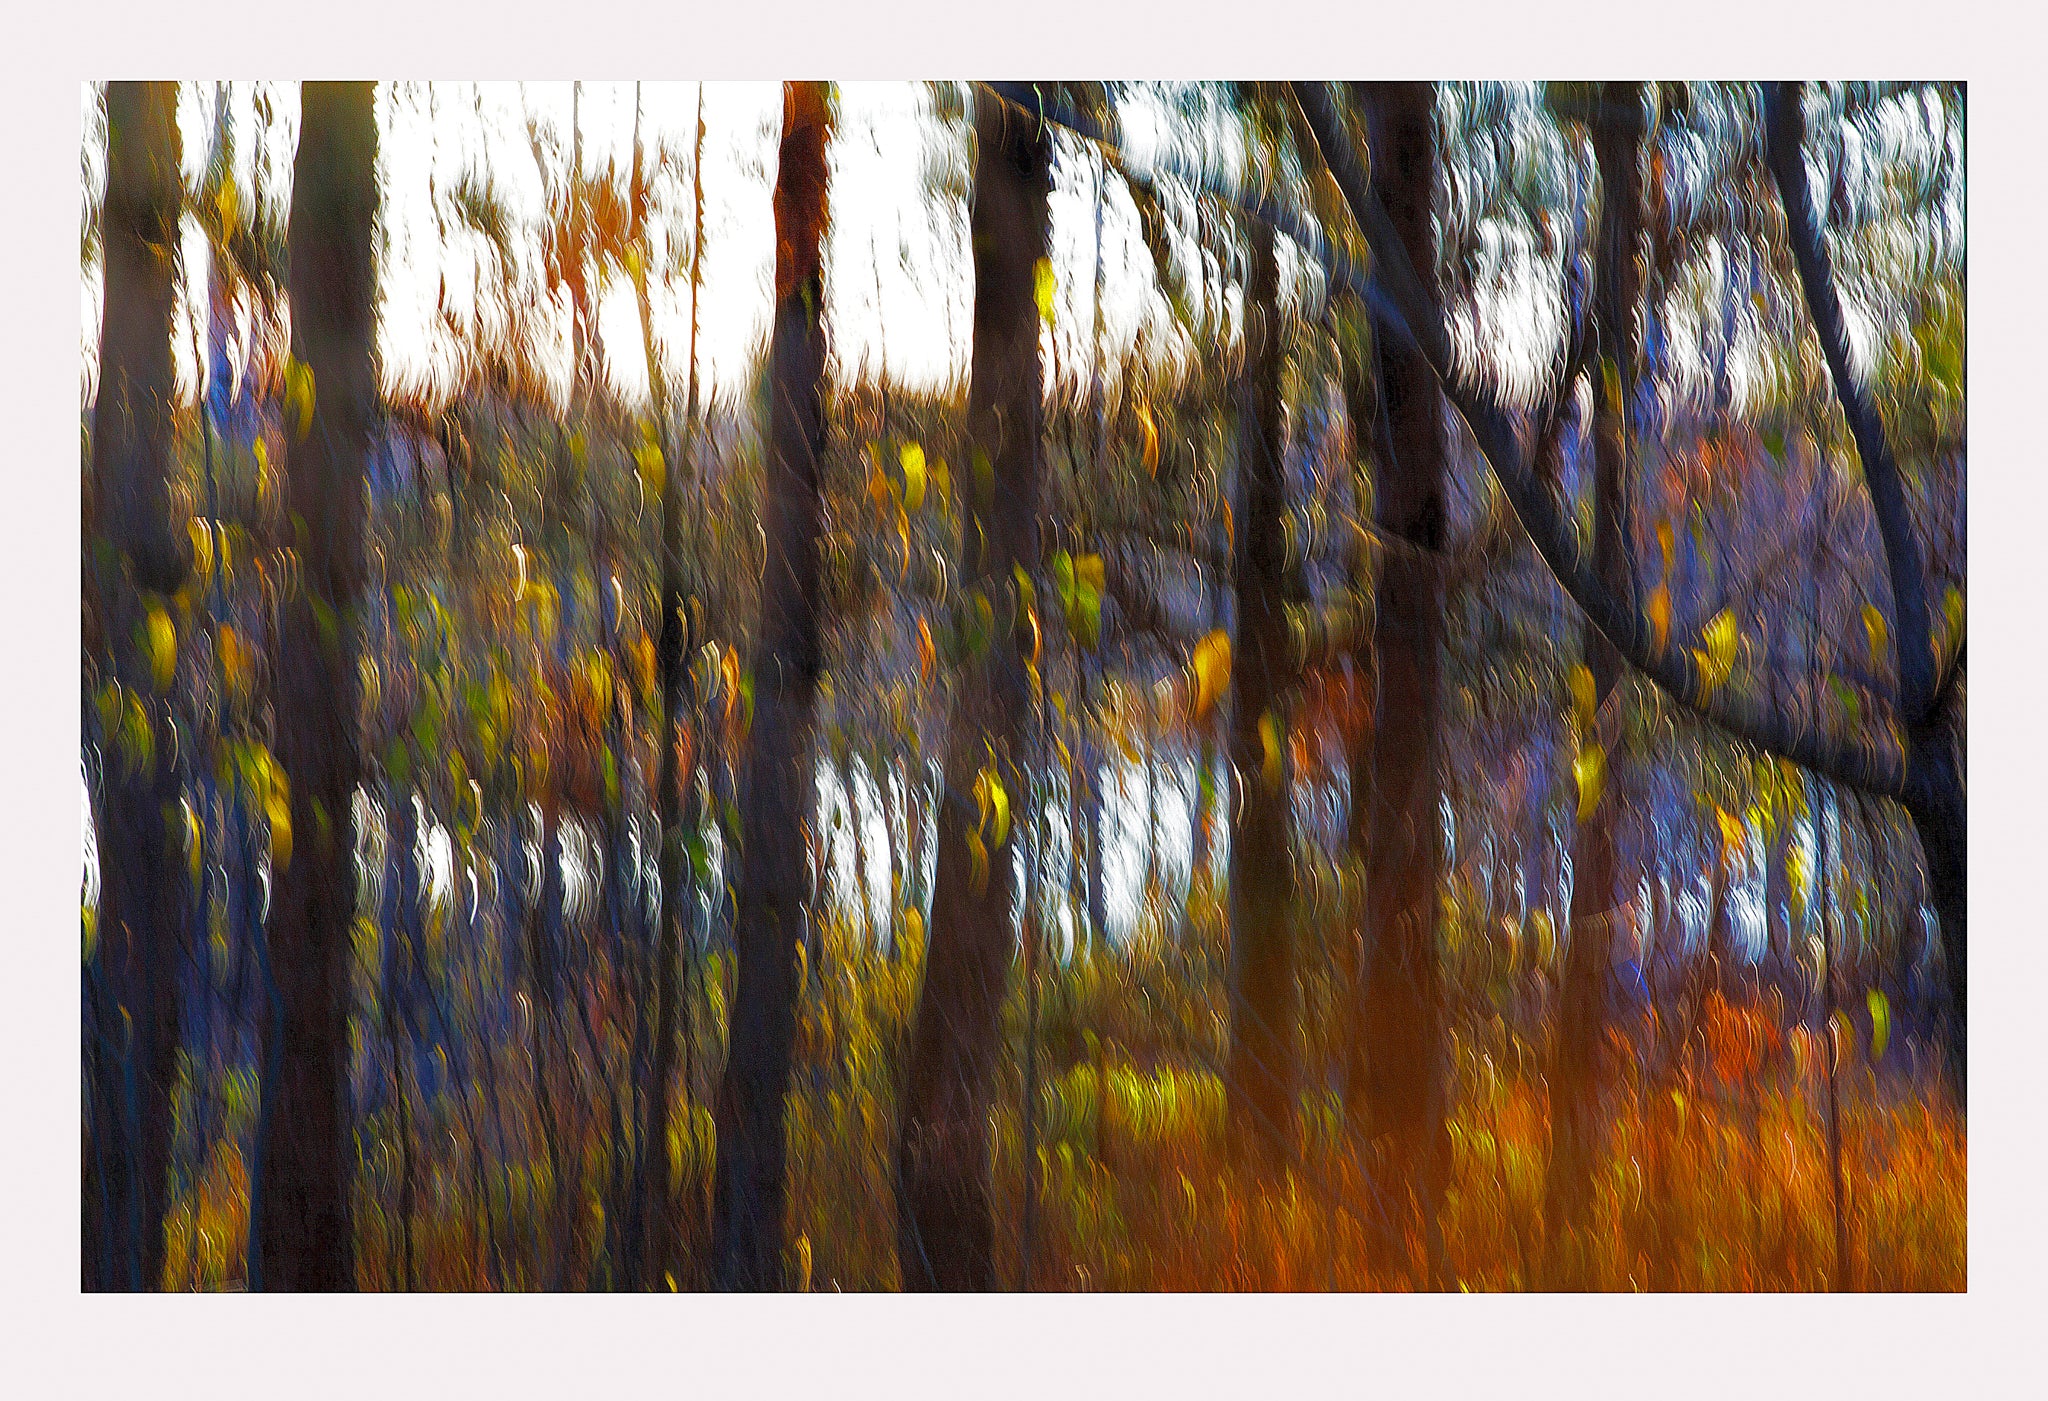 'Northern River' - Intentional Camera Movement